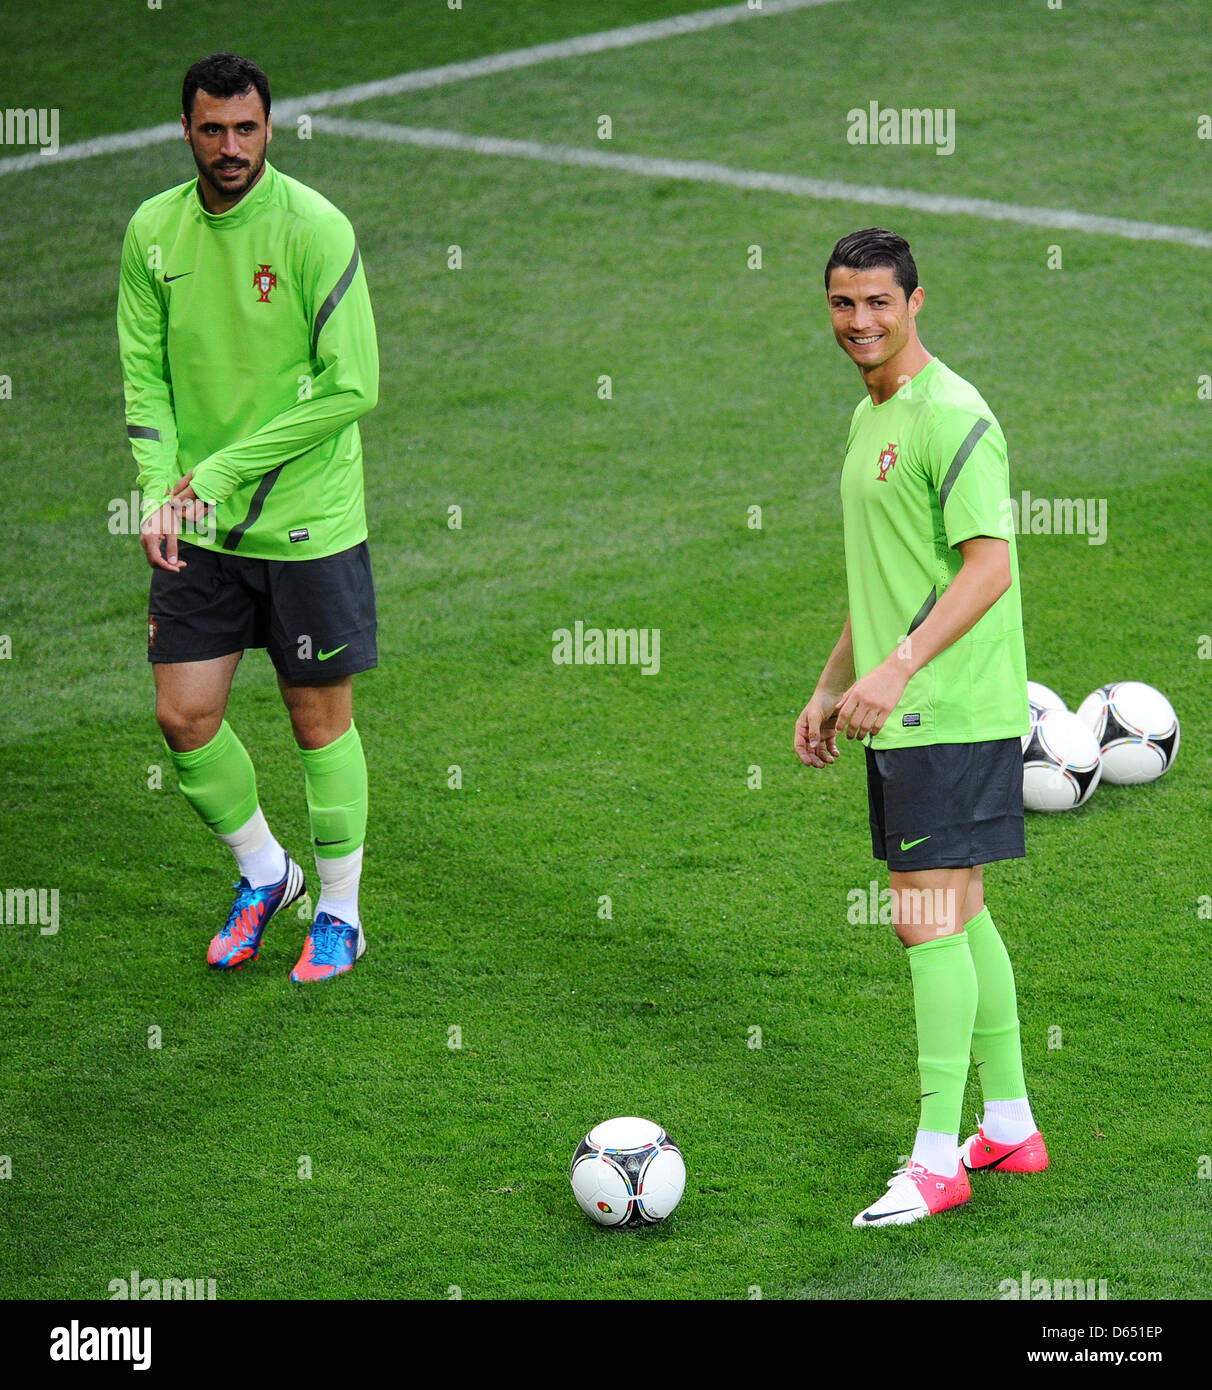 Portugal's Cristiano Ronaldo (R) and Hugo Almeida during a training session of the Portugal national soccer team at Arena Lviv in Lviv, the Ukraine, 08 June 2012. Photo: Thomas Eisenhuth dpa (Please refer to chapters 7 and 8 of http://dpaq.de/Ziovh for UEFA Euro 2012 Terms & Conditions)  +++(c) dpa - Bildfunk+++ Stock Photo